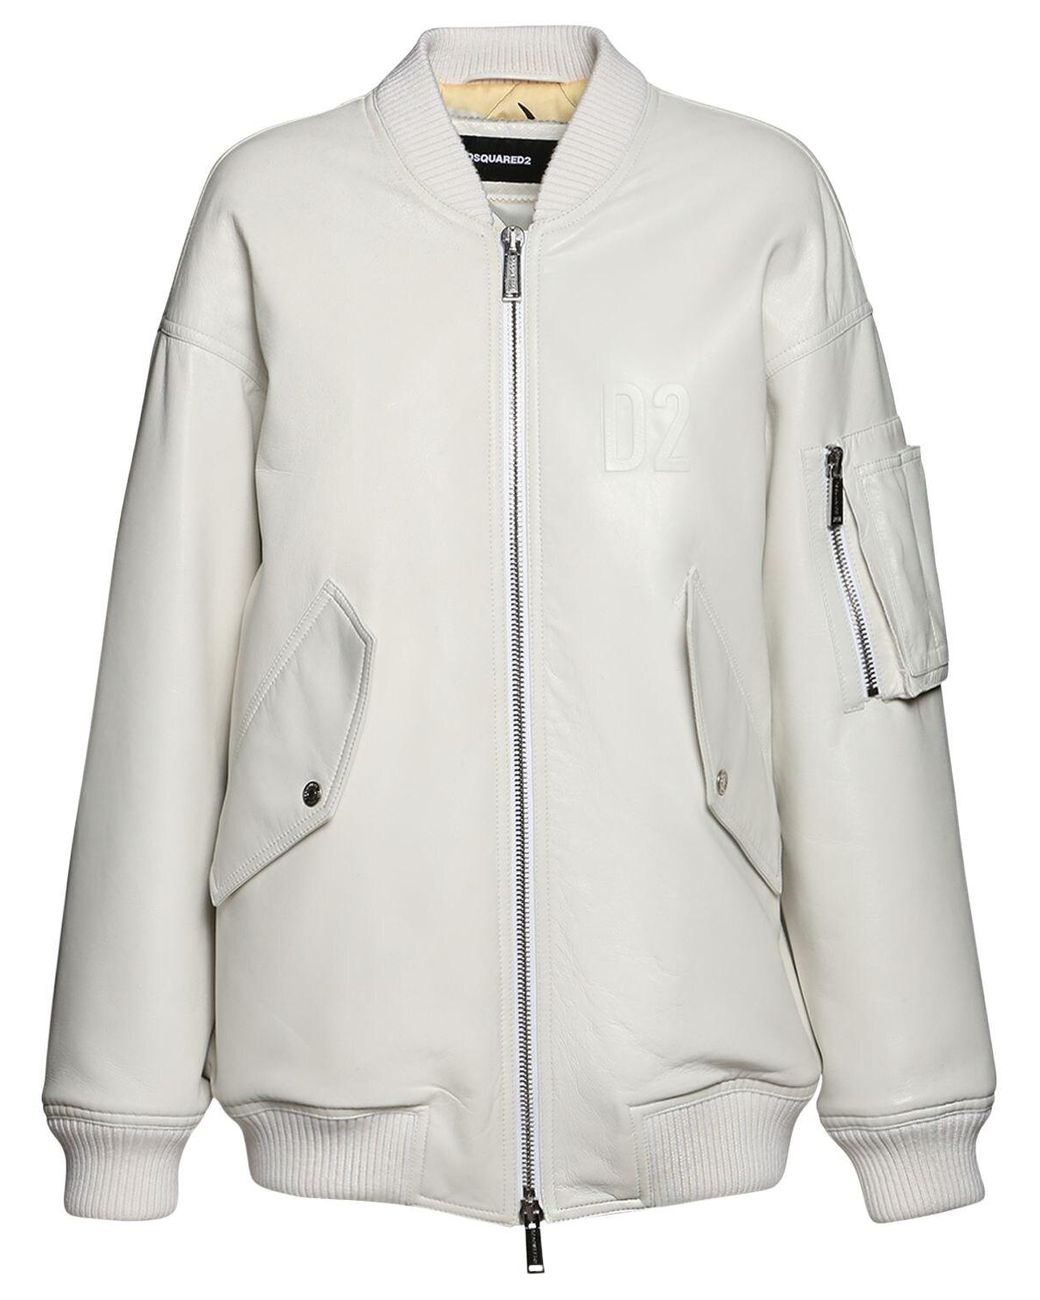 DSquared² Oversized Leather Bomber Jacket in White | Lyst Canada